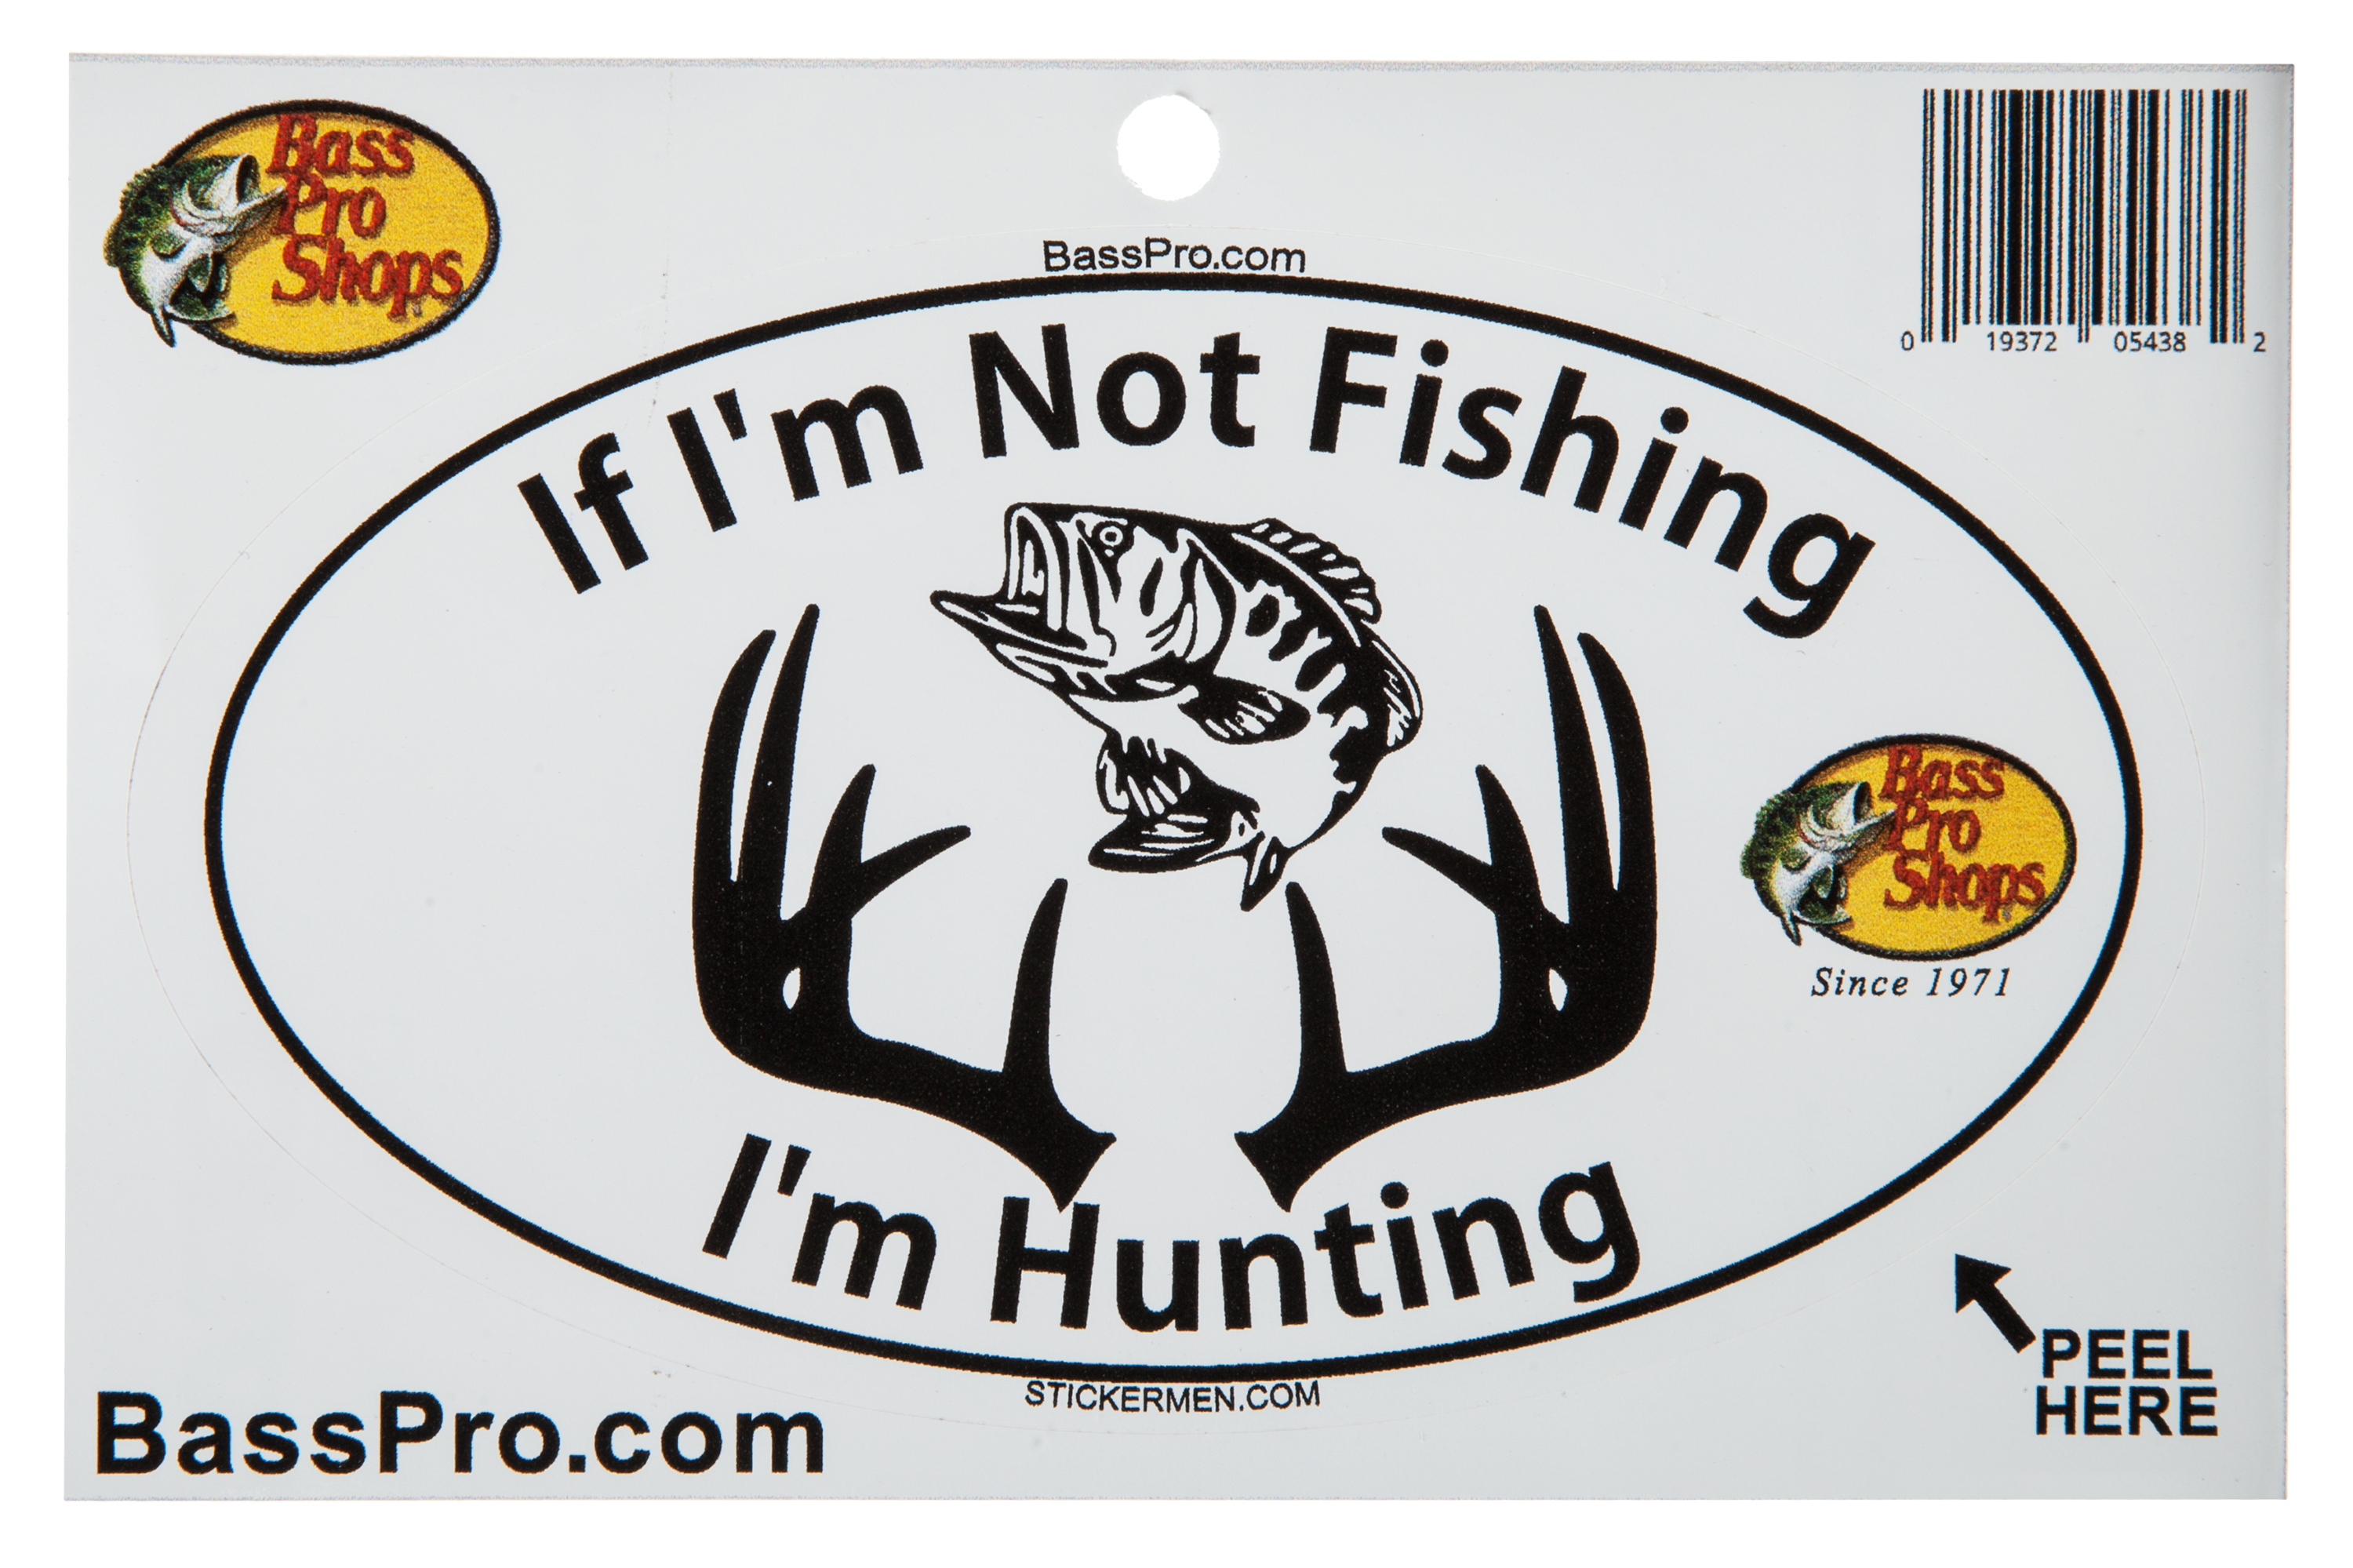 Bass Pro Shops Fishing and Hunting Oval Decal